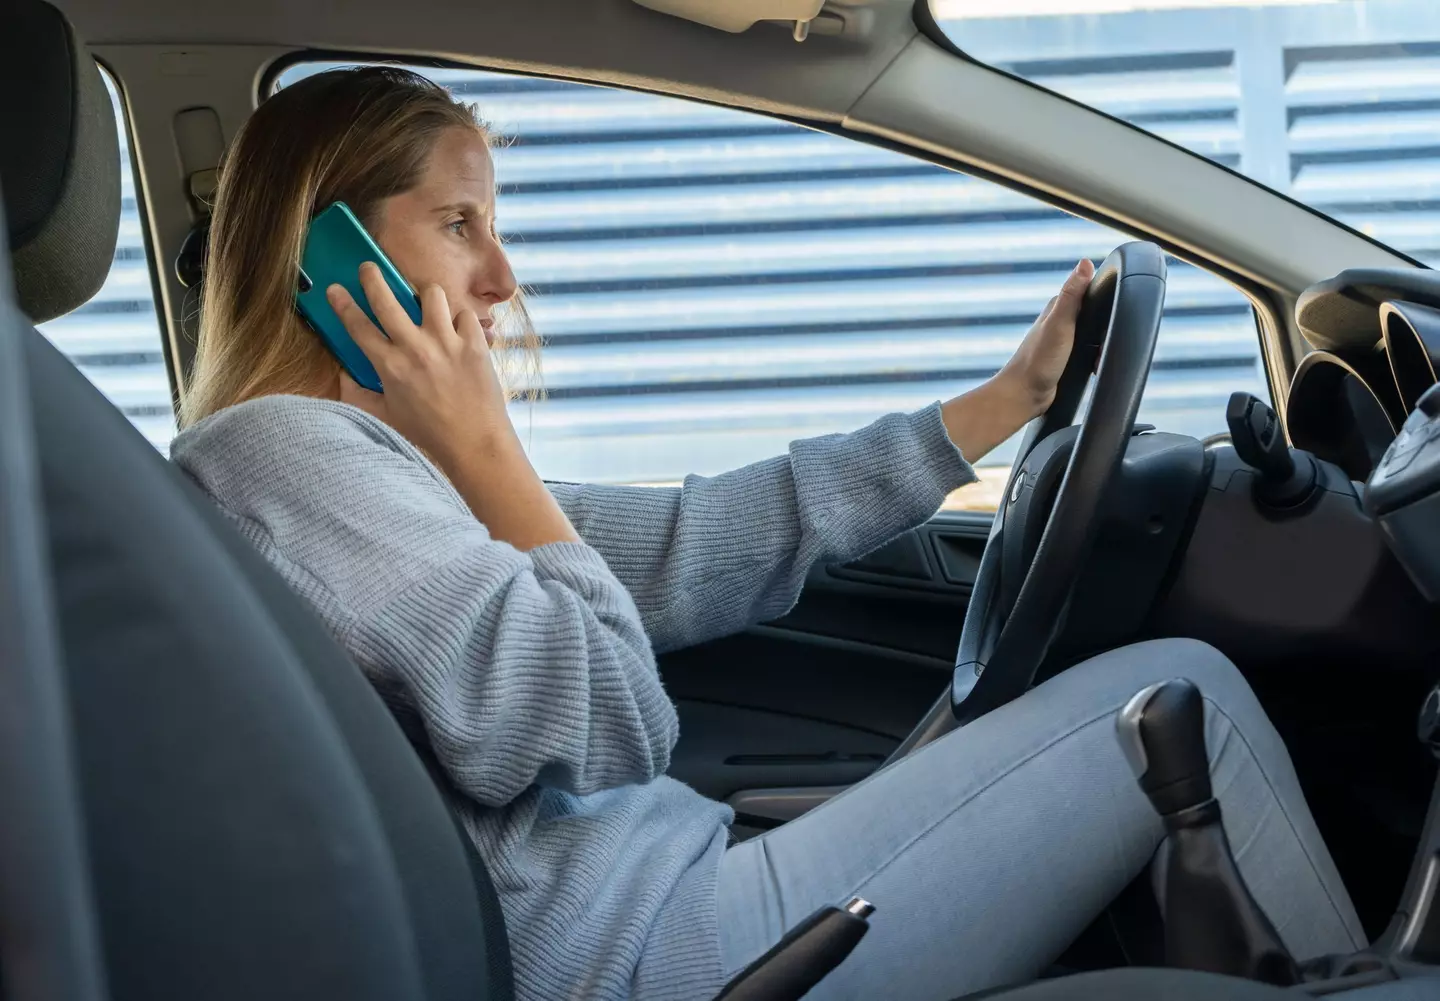 It is already illegal to make a phone call while driving (